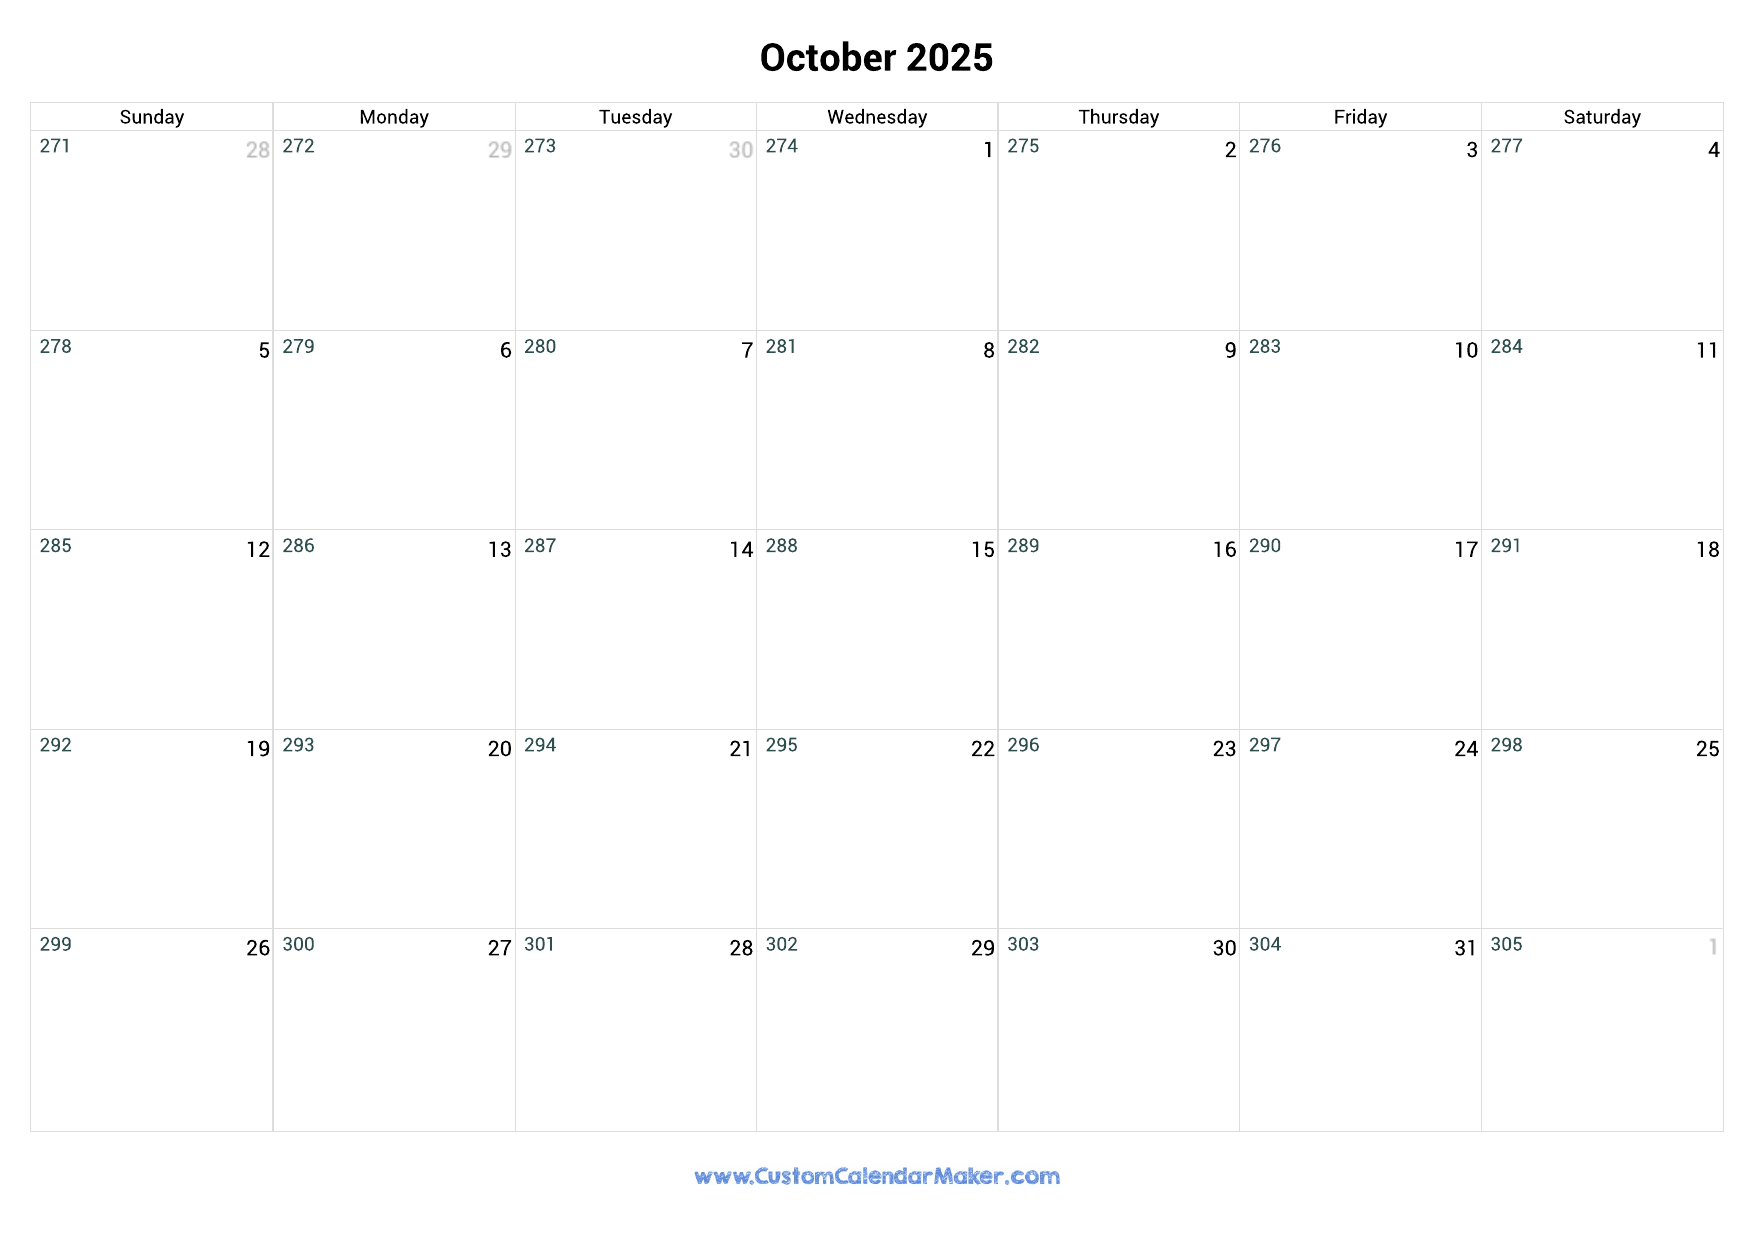 october-2025-day-number-of-the-year-calendar